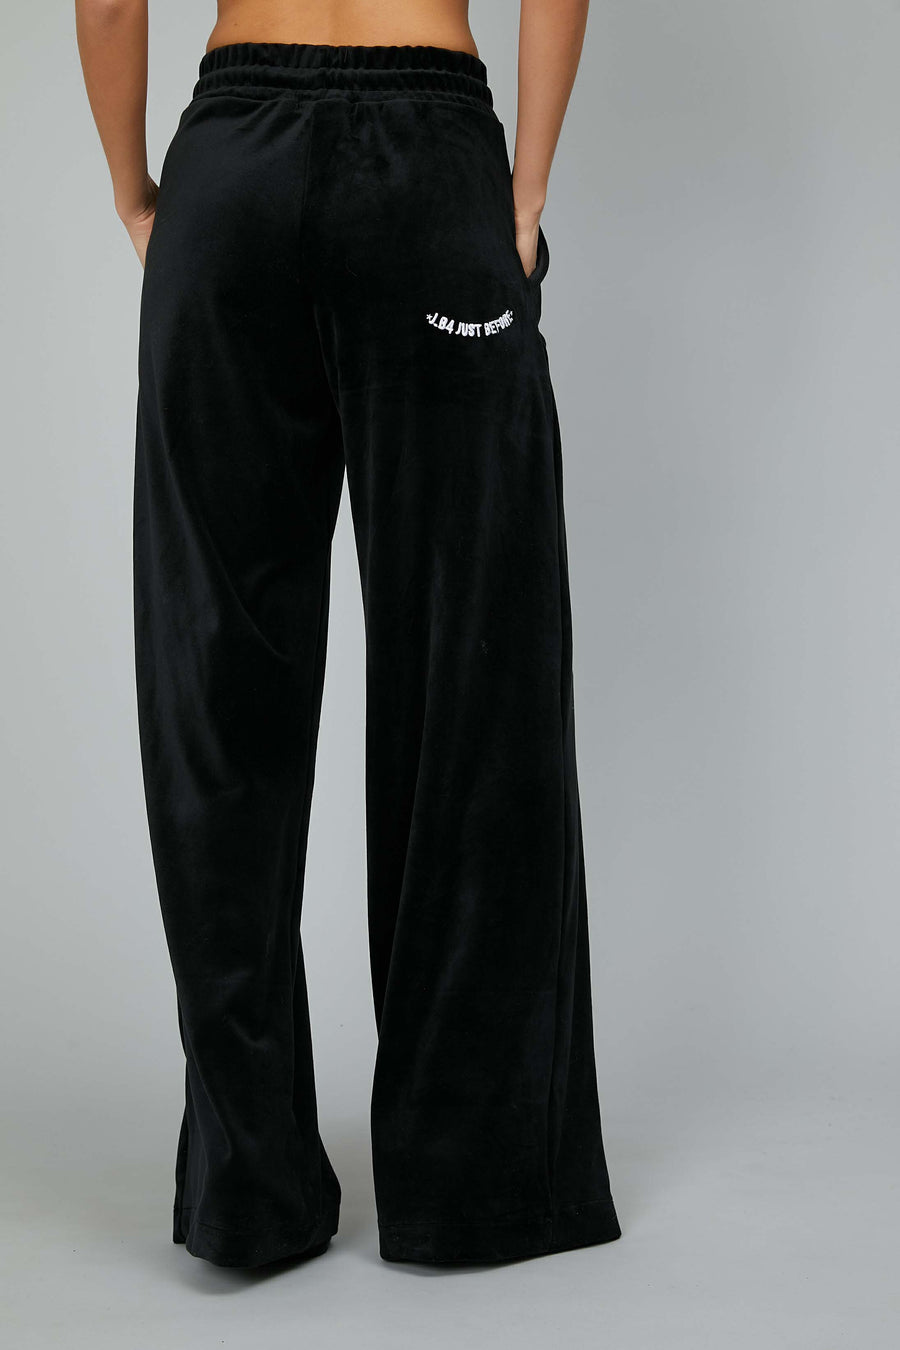 BLACK FLARED CHENILLE TROUSERS